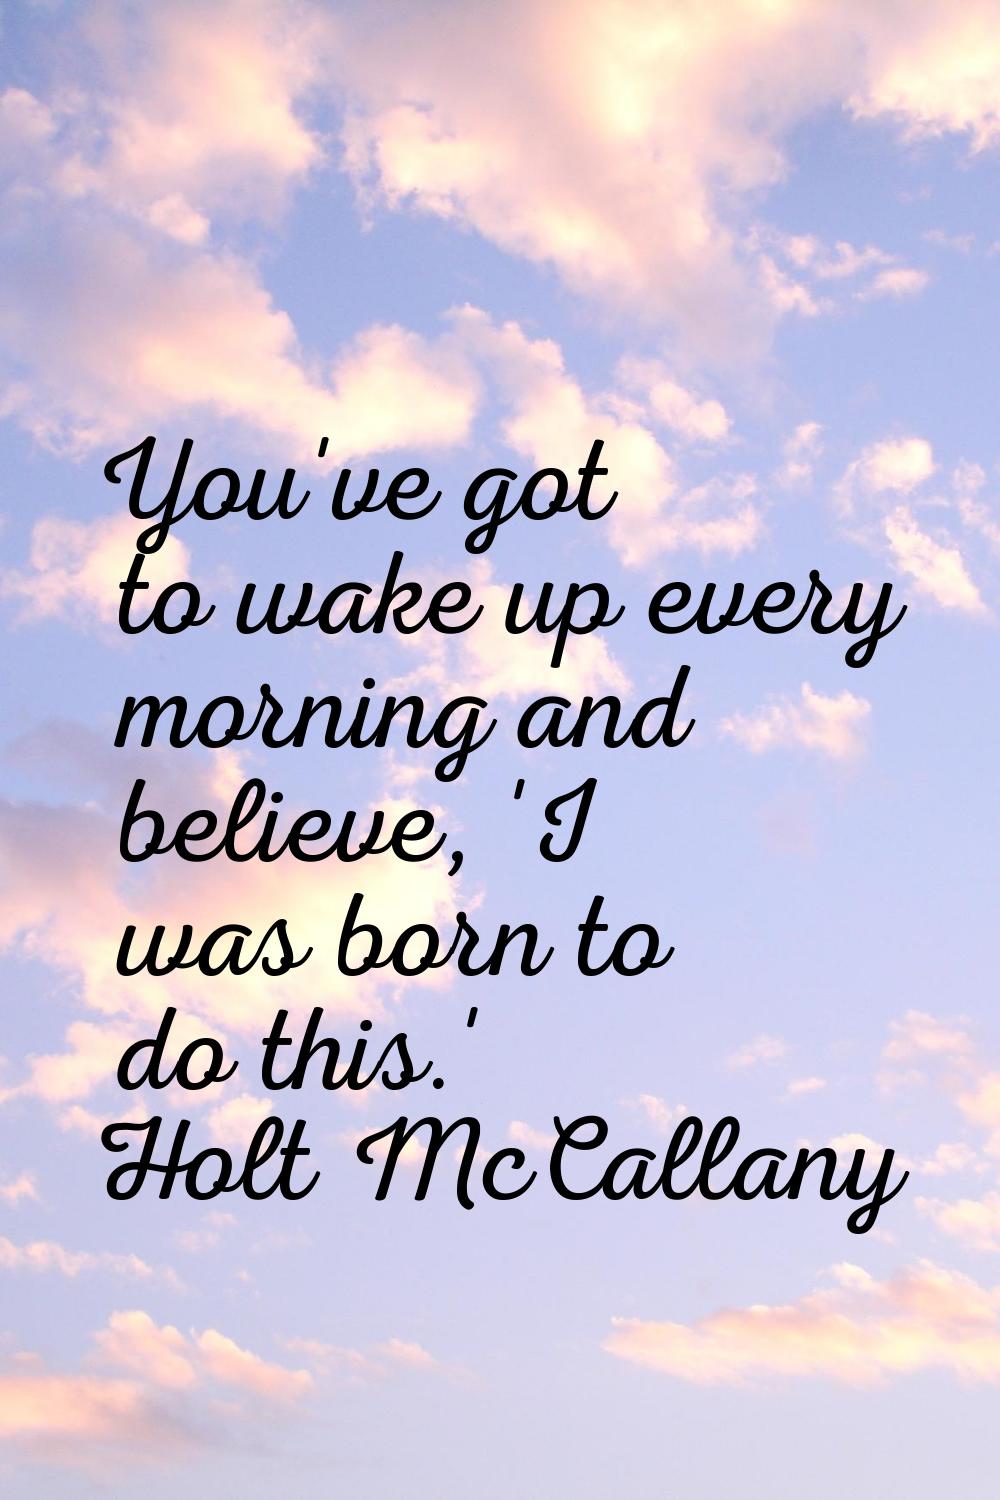 You've got to wake up every morning and believe, 'I was born to do this.'